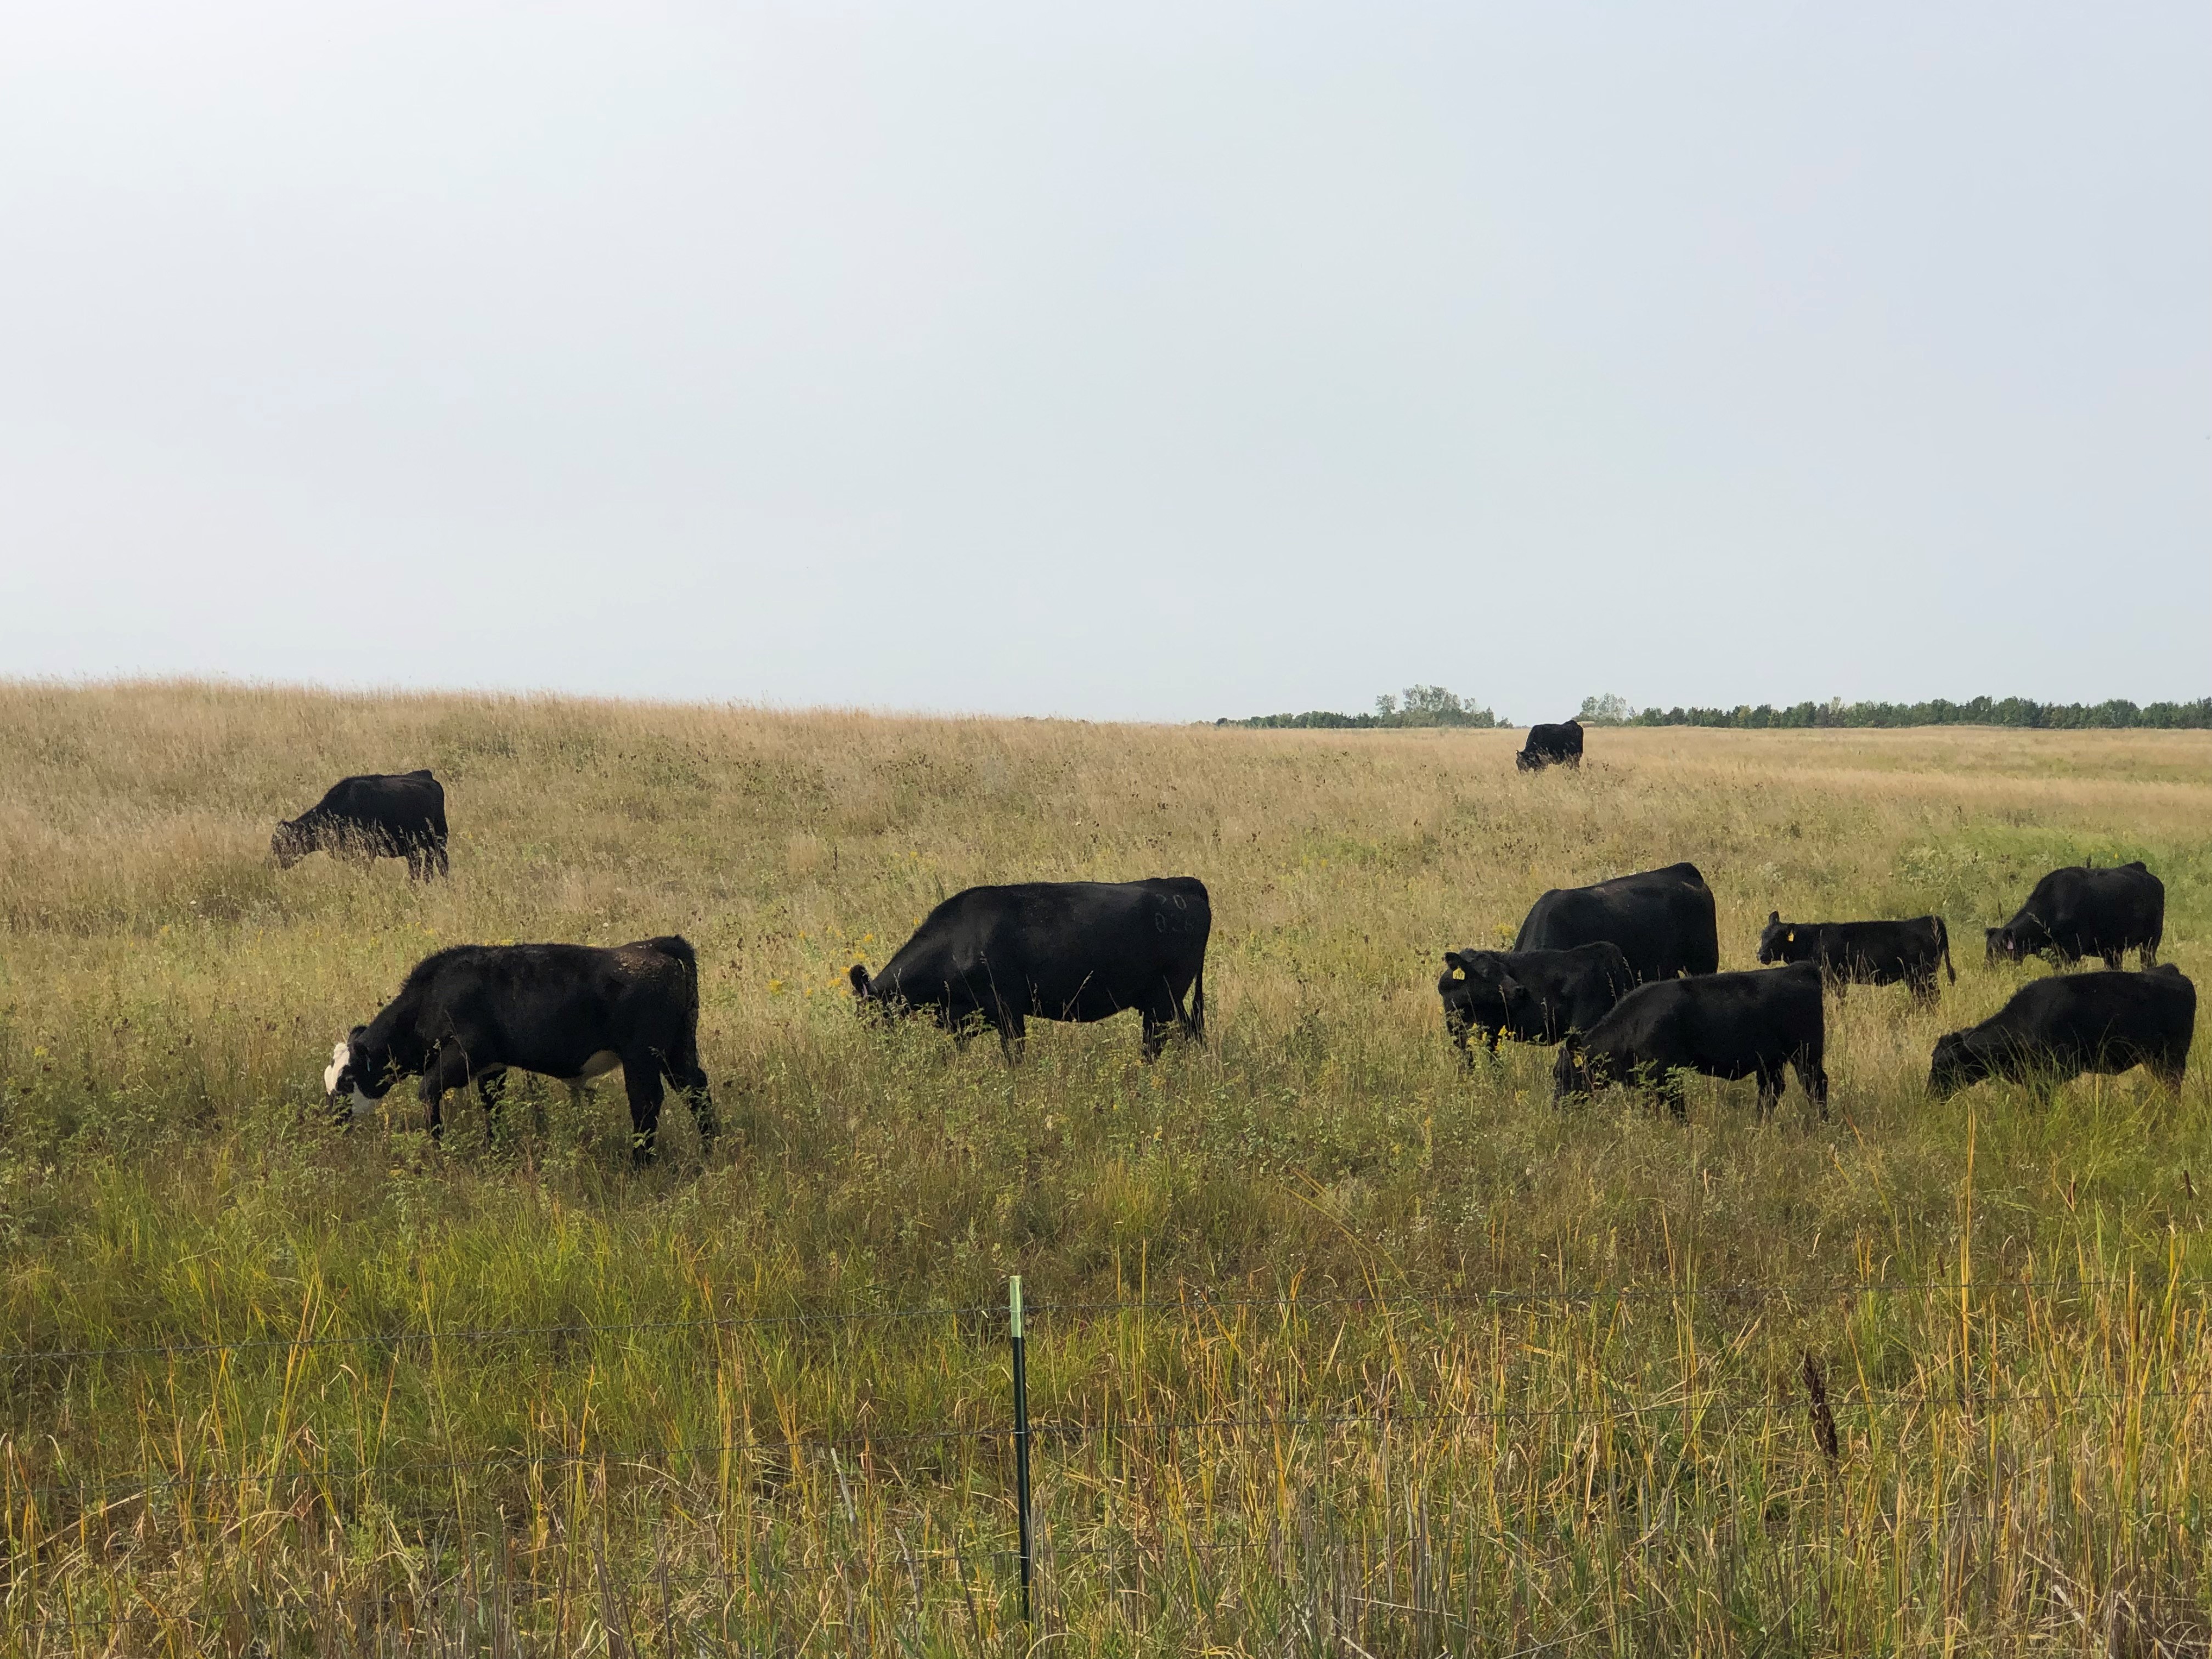 Heavy grazing use in the fall can have significant impacts on forage production the following growing season. (NDSU photo)